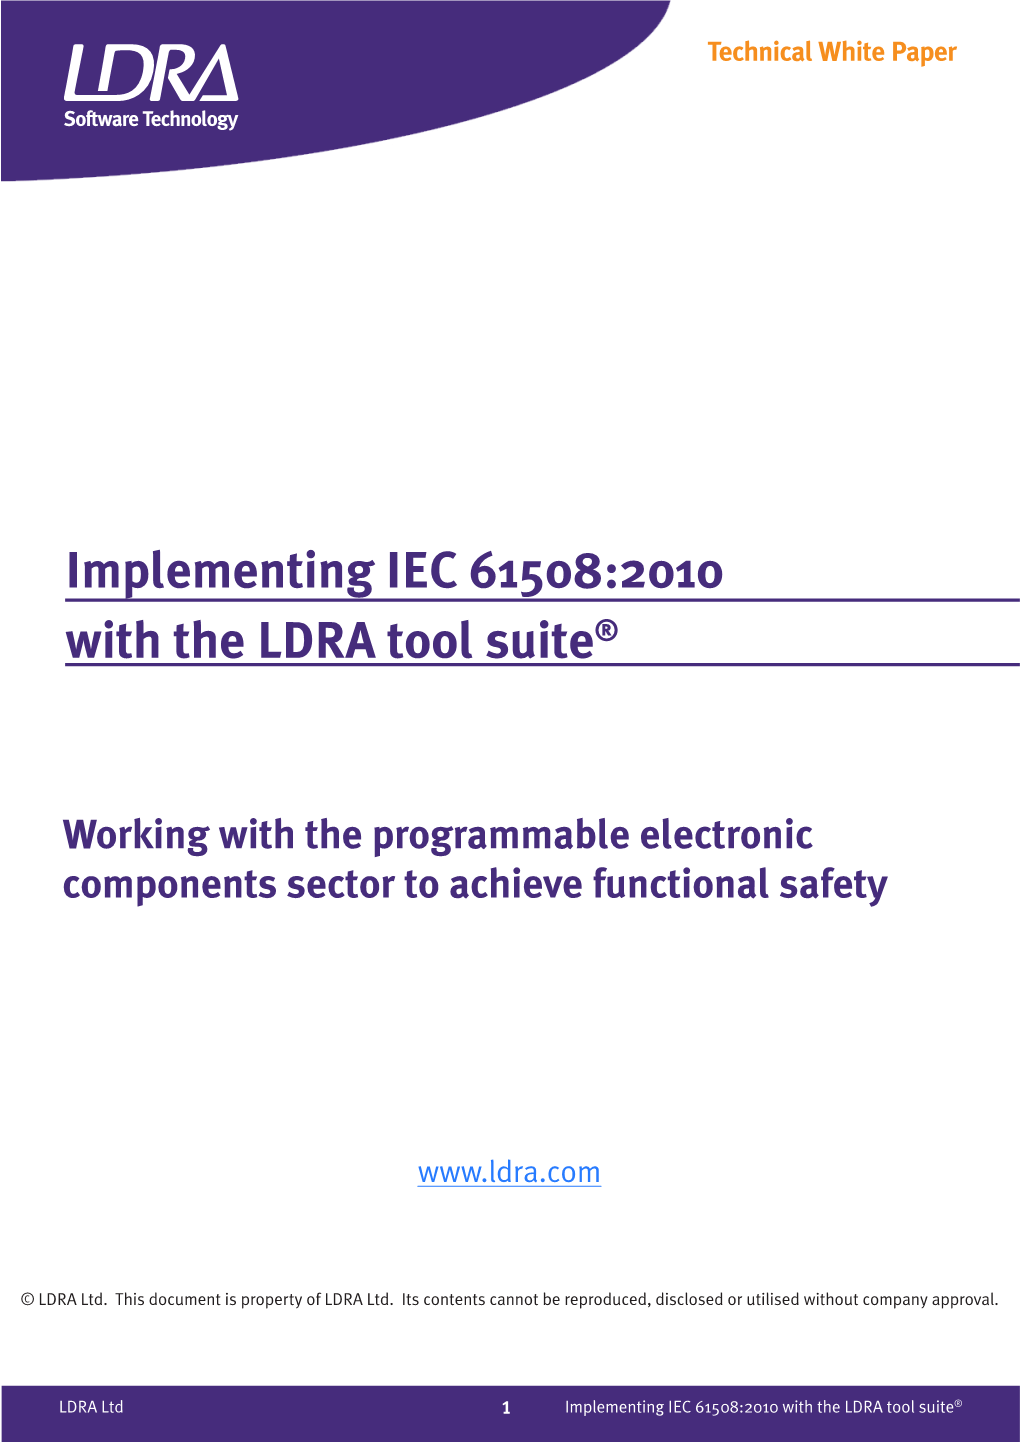 Implementing IEC 61508:2010 with the LDRA Tool Suite®